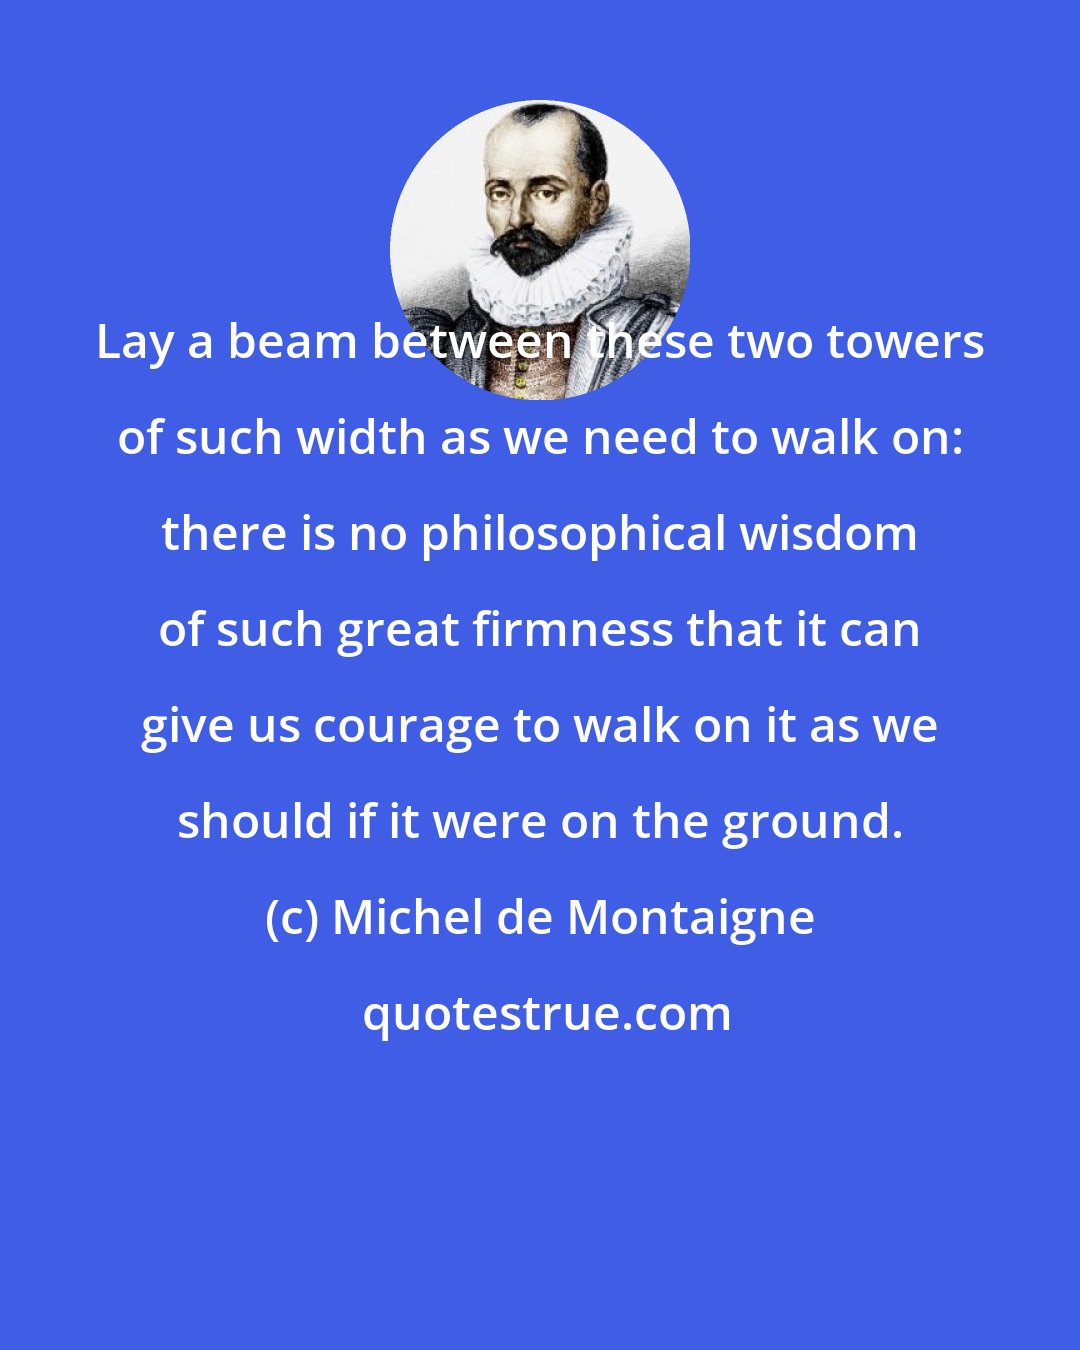 Michel de Montaigne: Lay a beam between these two towers of such width as we need to walk on: there is no philosophical wisdom of such great firmness that it can give us courage to walk on it as we should if it were on the ground.